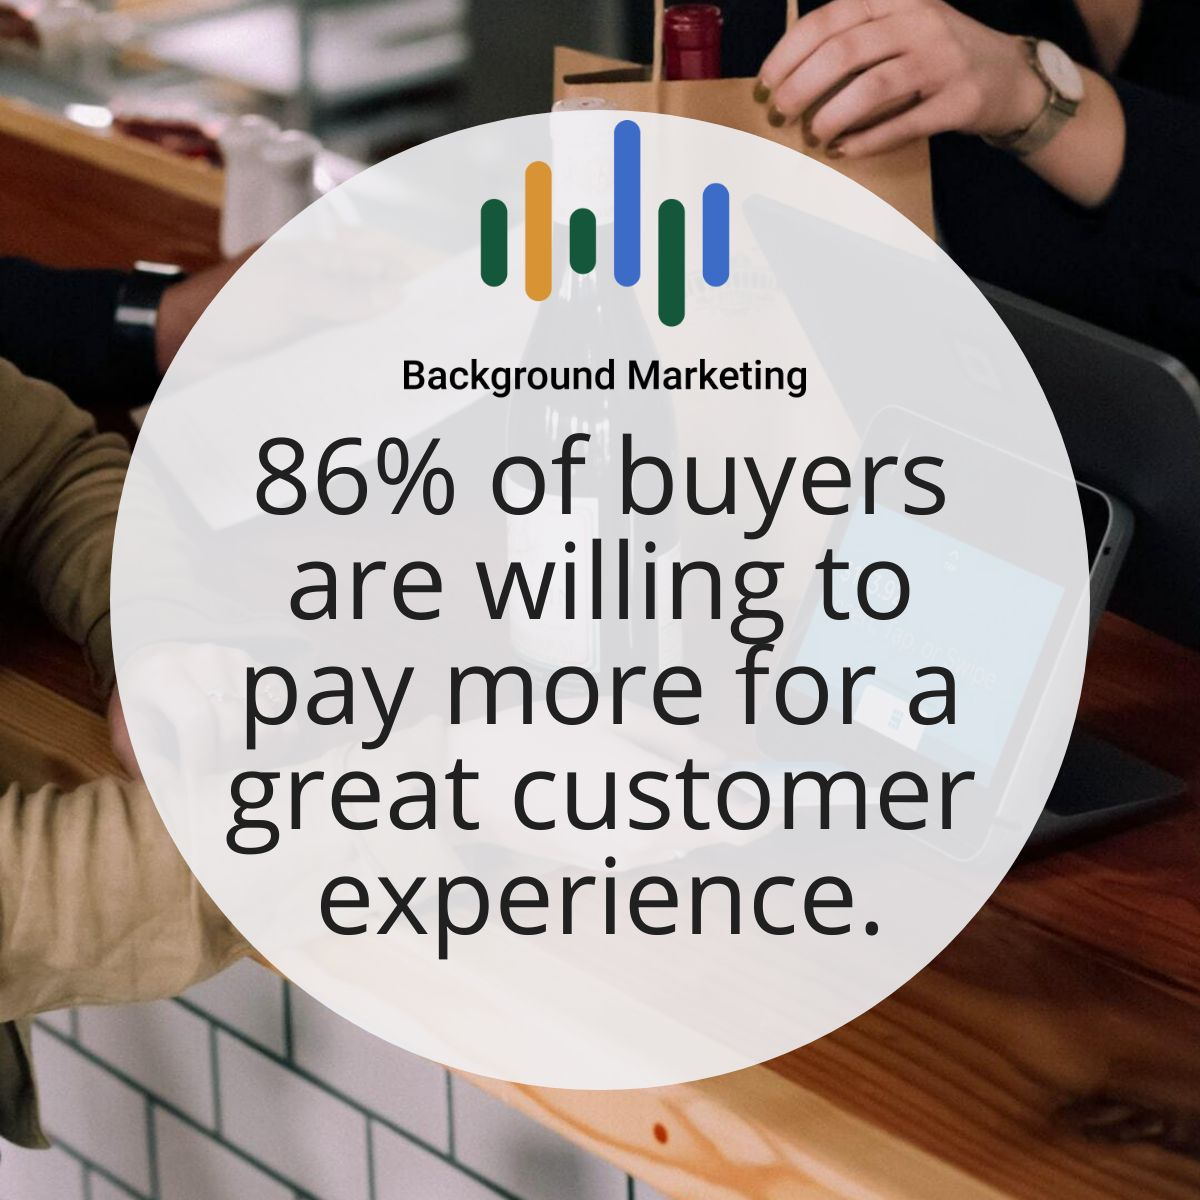 📣 Small Biz Owners: 86% of buyers will PAY MORE for a great customer experience! Time to level up your service game. 💪🛒 #CustomerExperience #SmallBusiness #ValueOverPrice